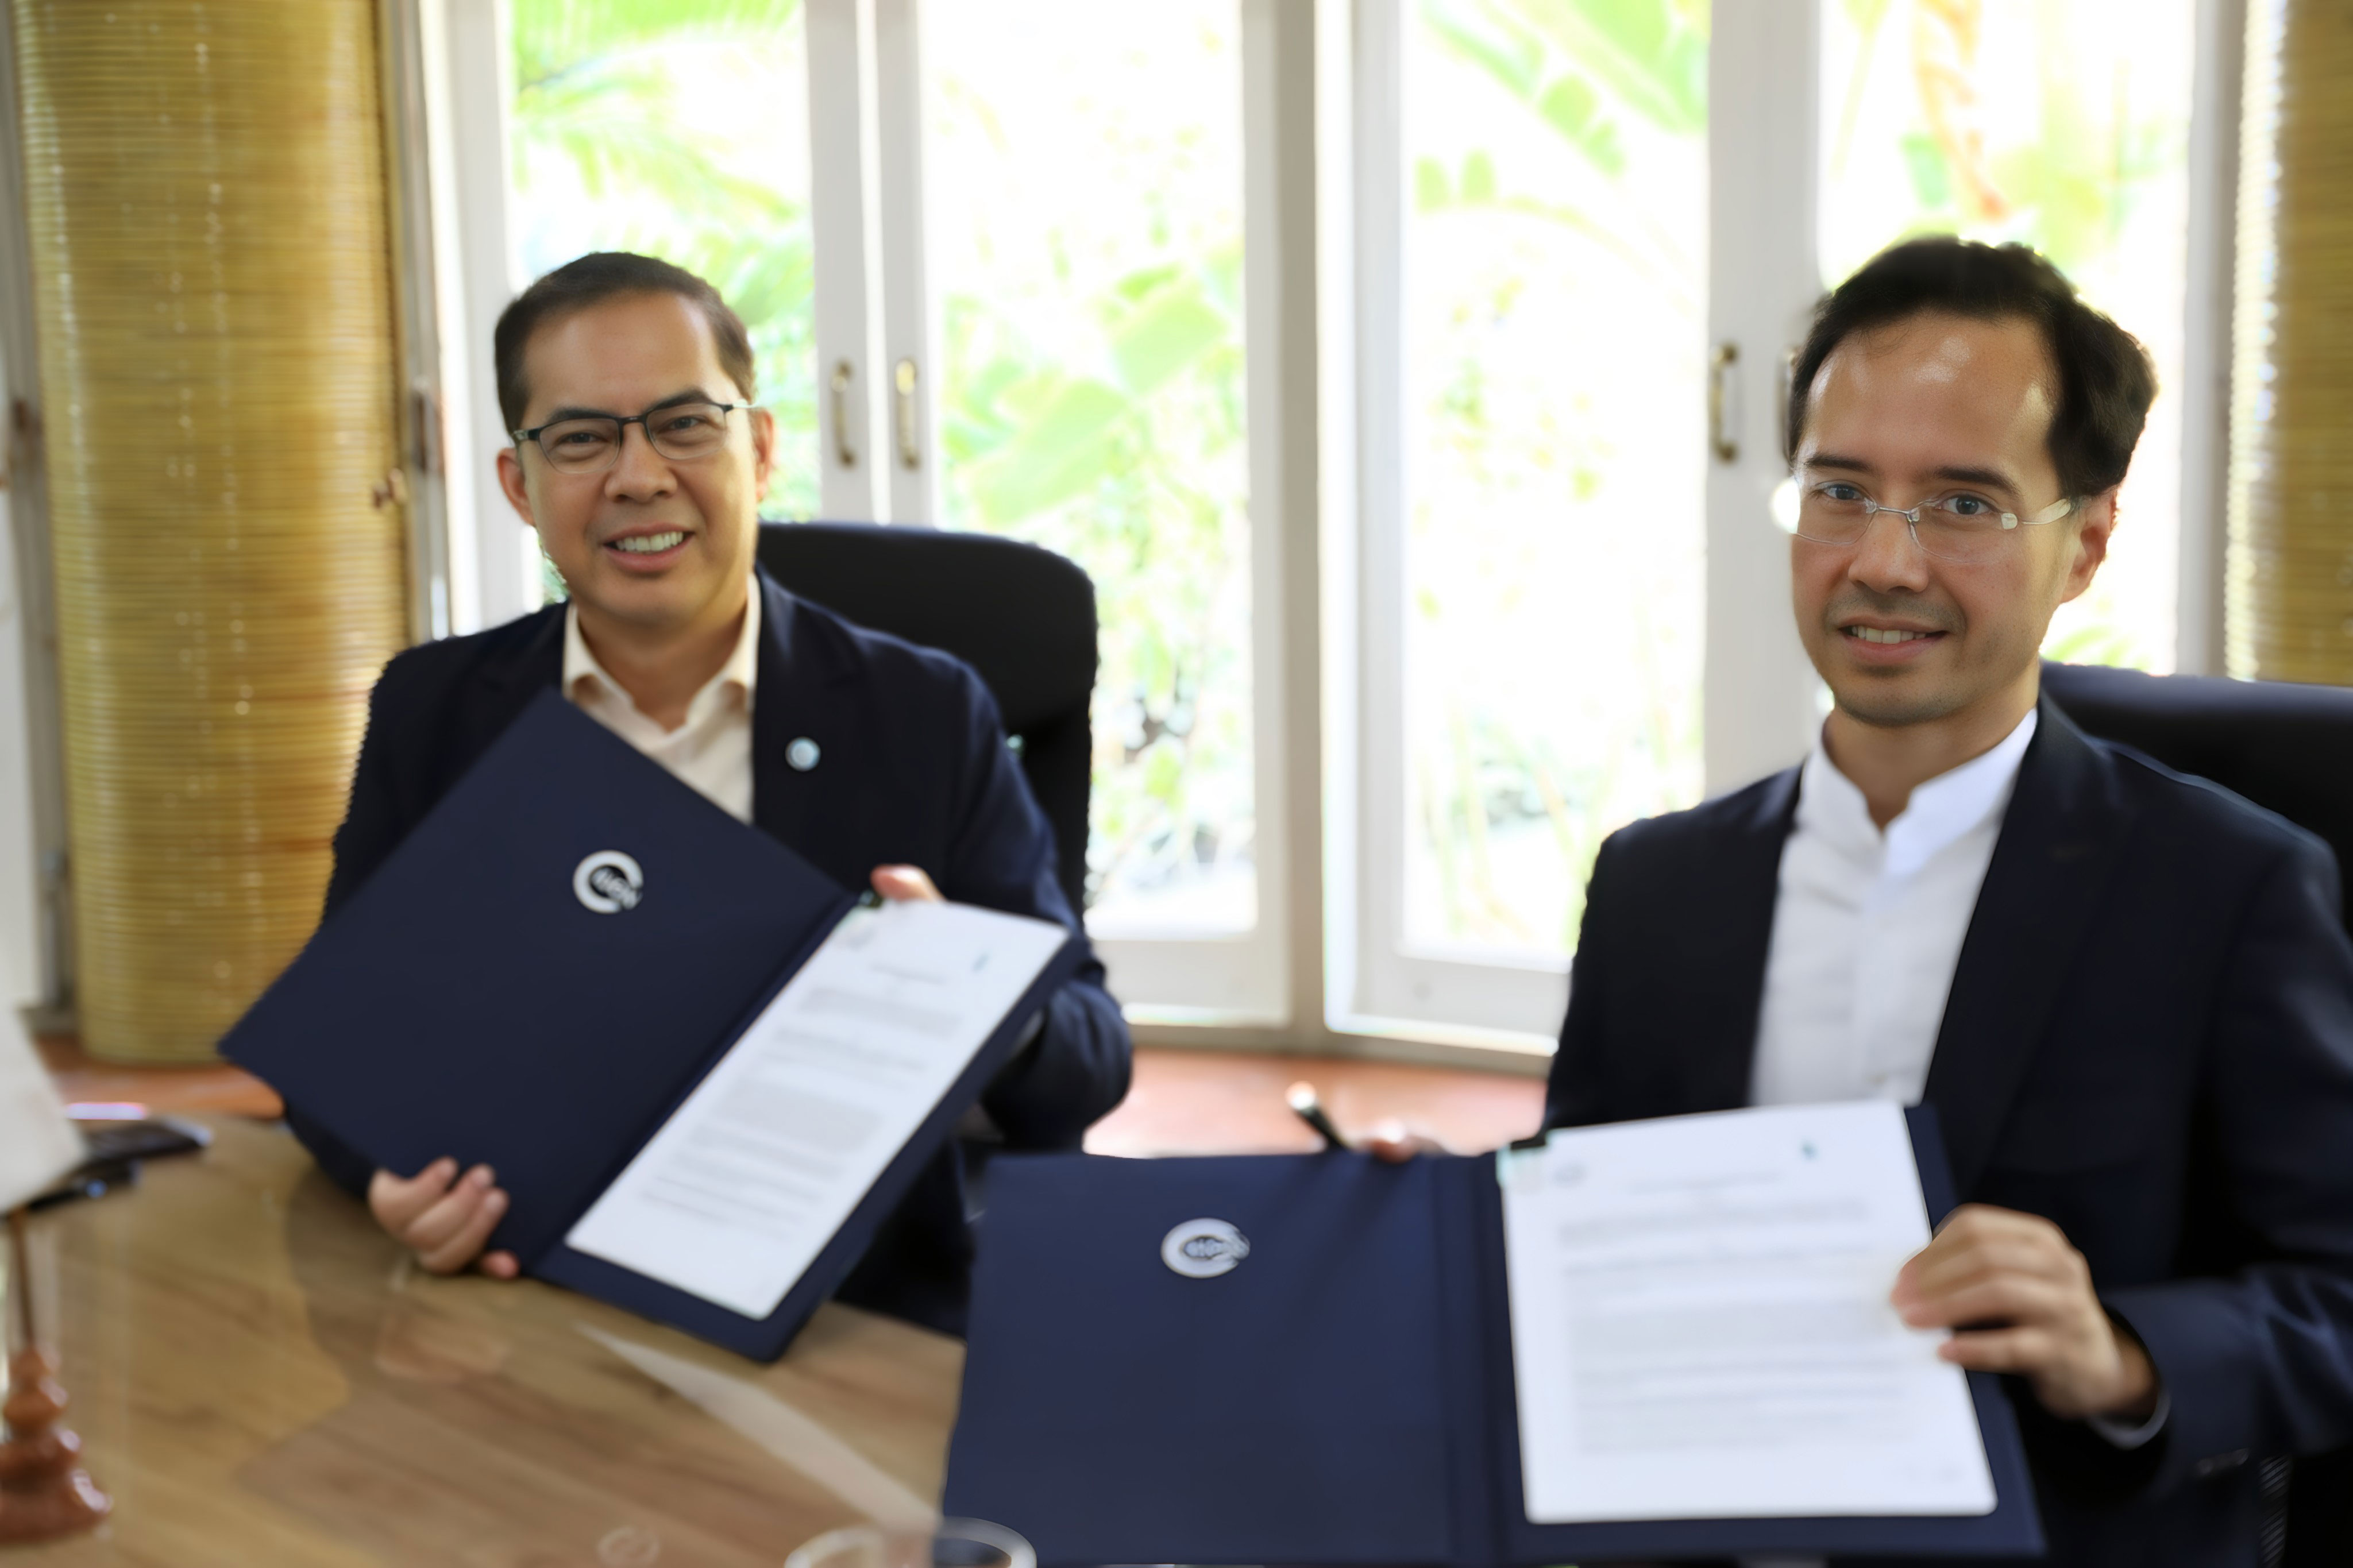 MoU signing with Ascent Partners Foundation